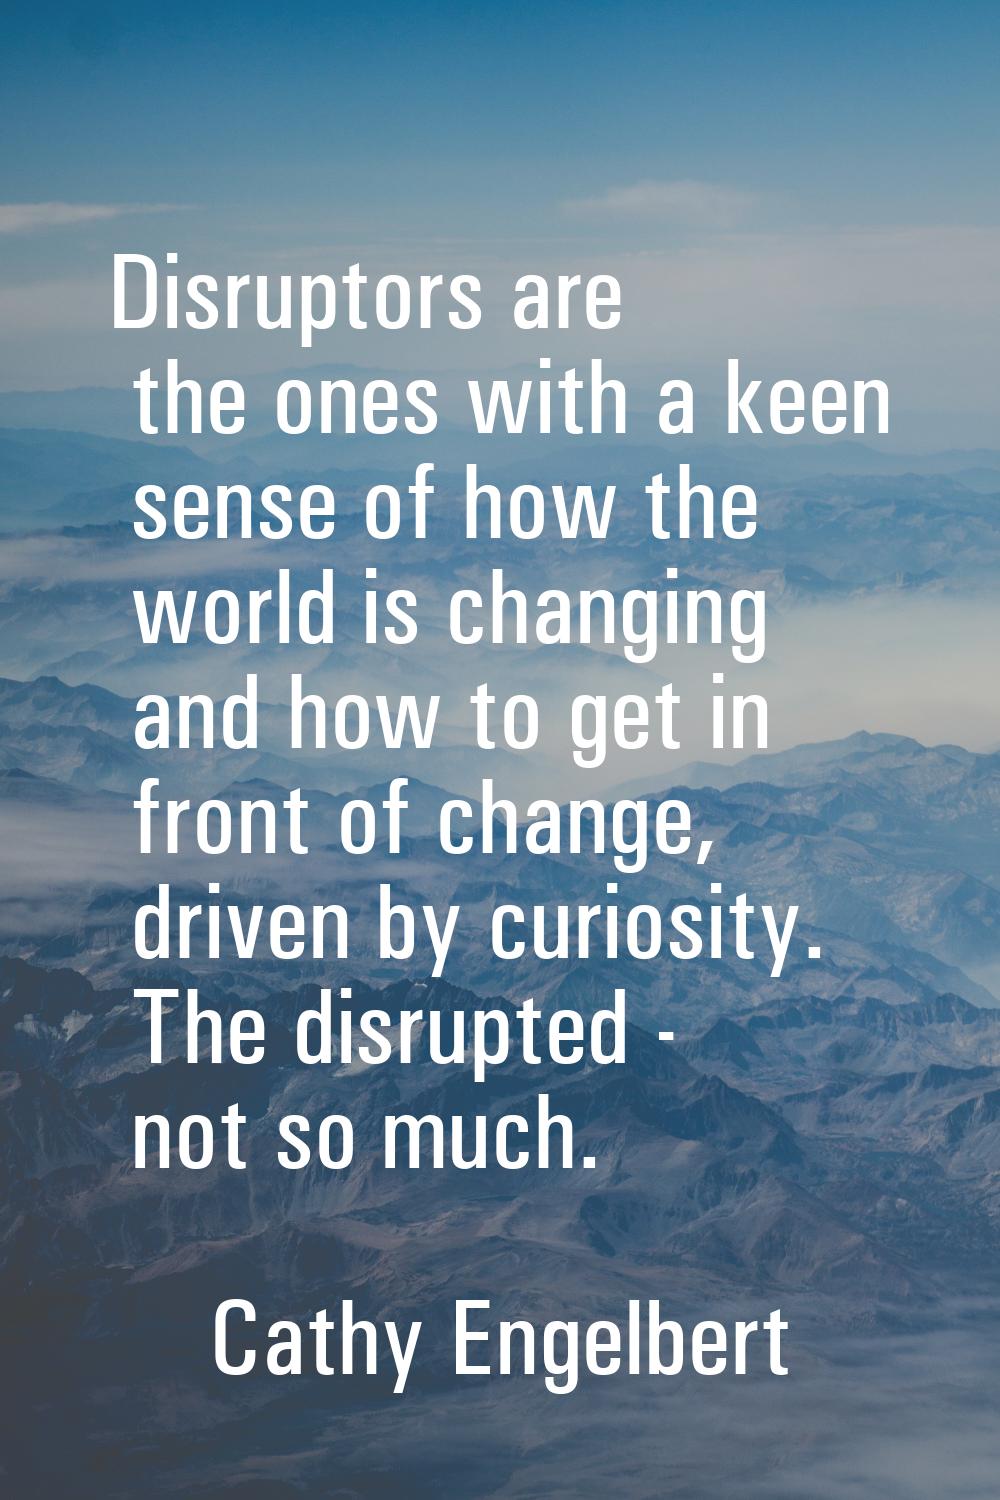 Disruptors are the ones with a keen sense of how the world is changing and how to get in front of c